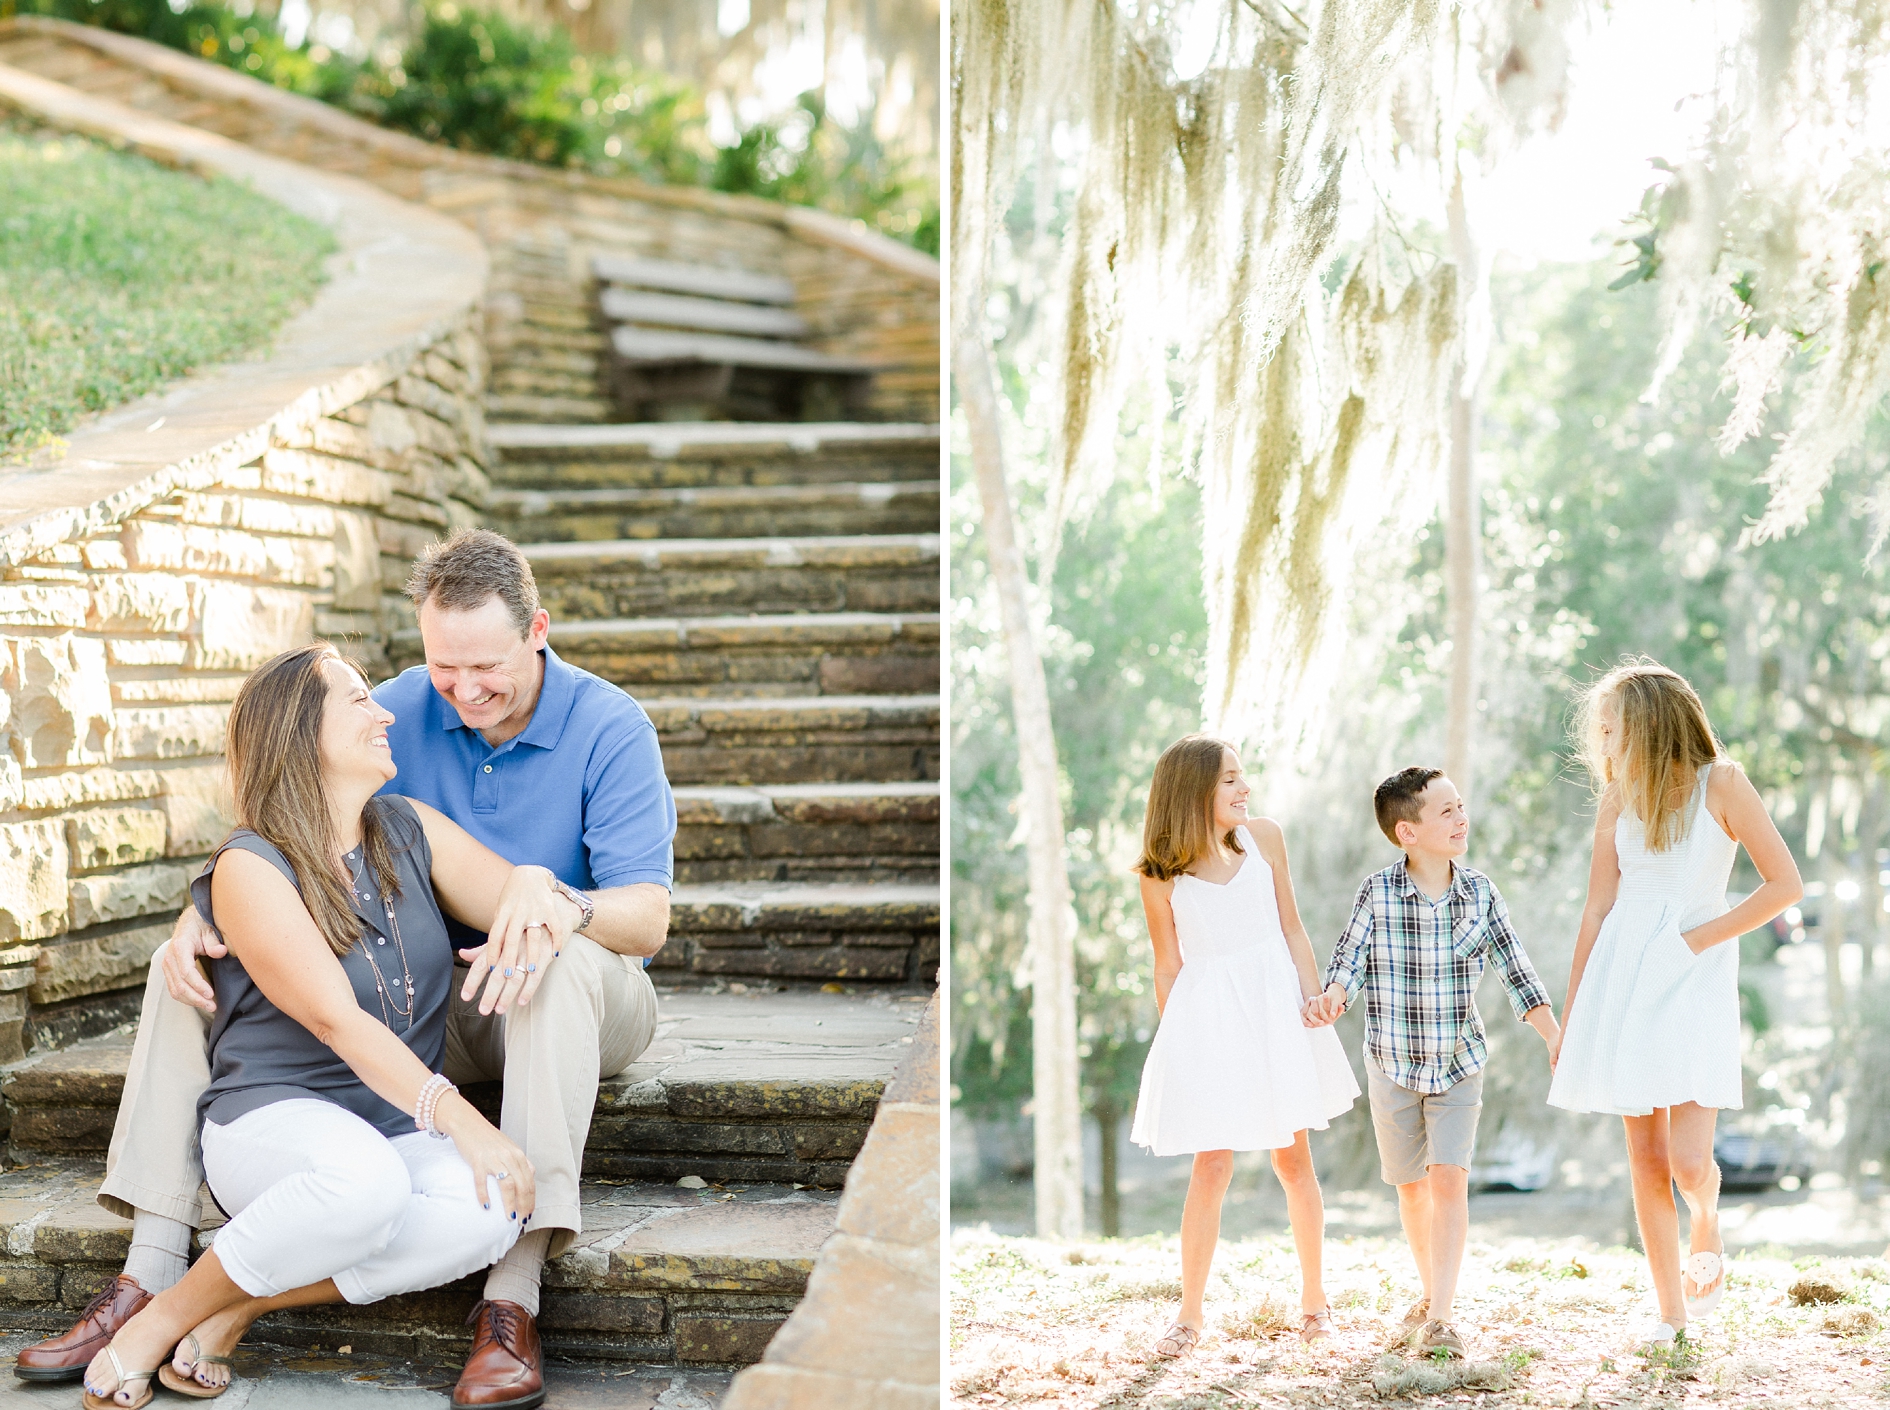 Tampa Family Photographer | © Ailyn La Torre Photography 2017